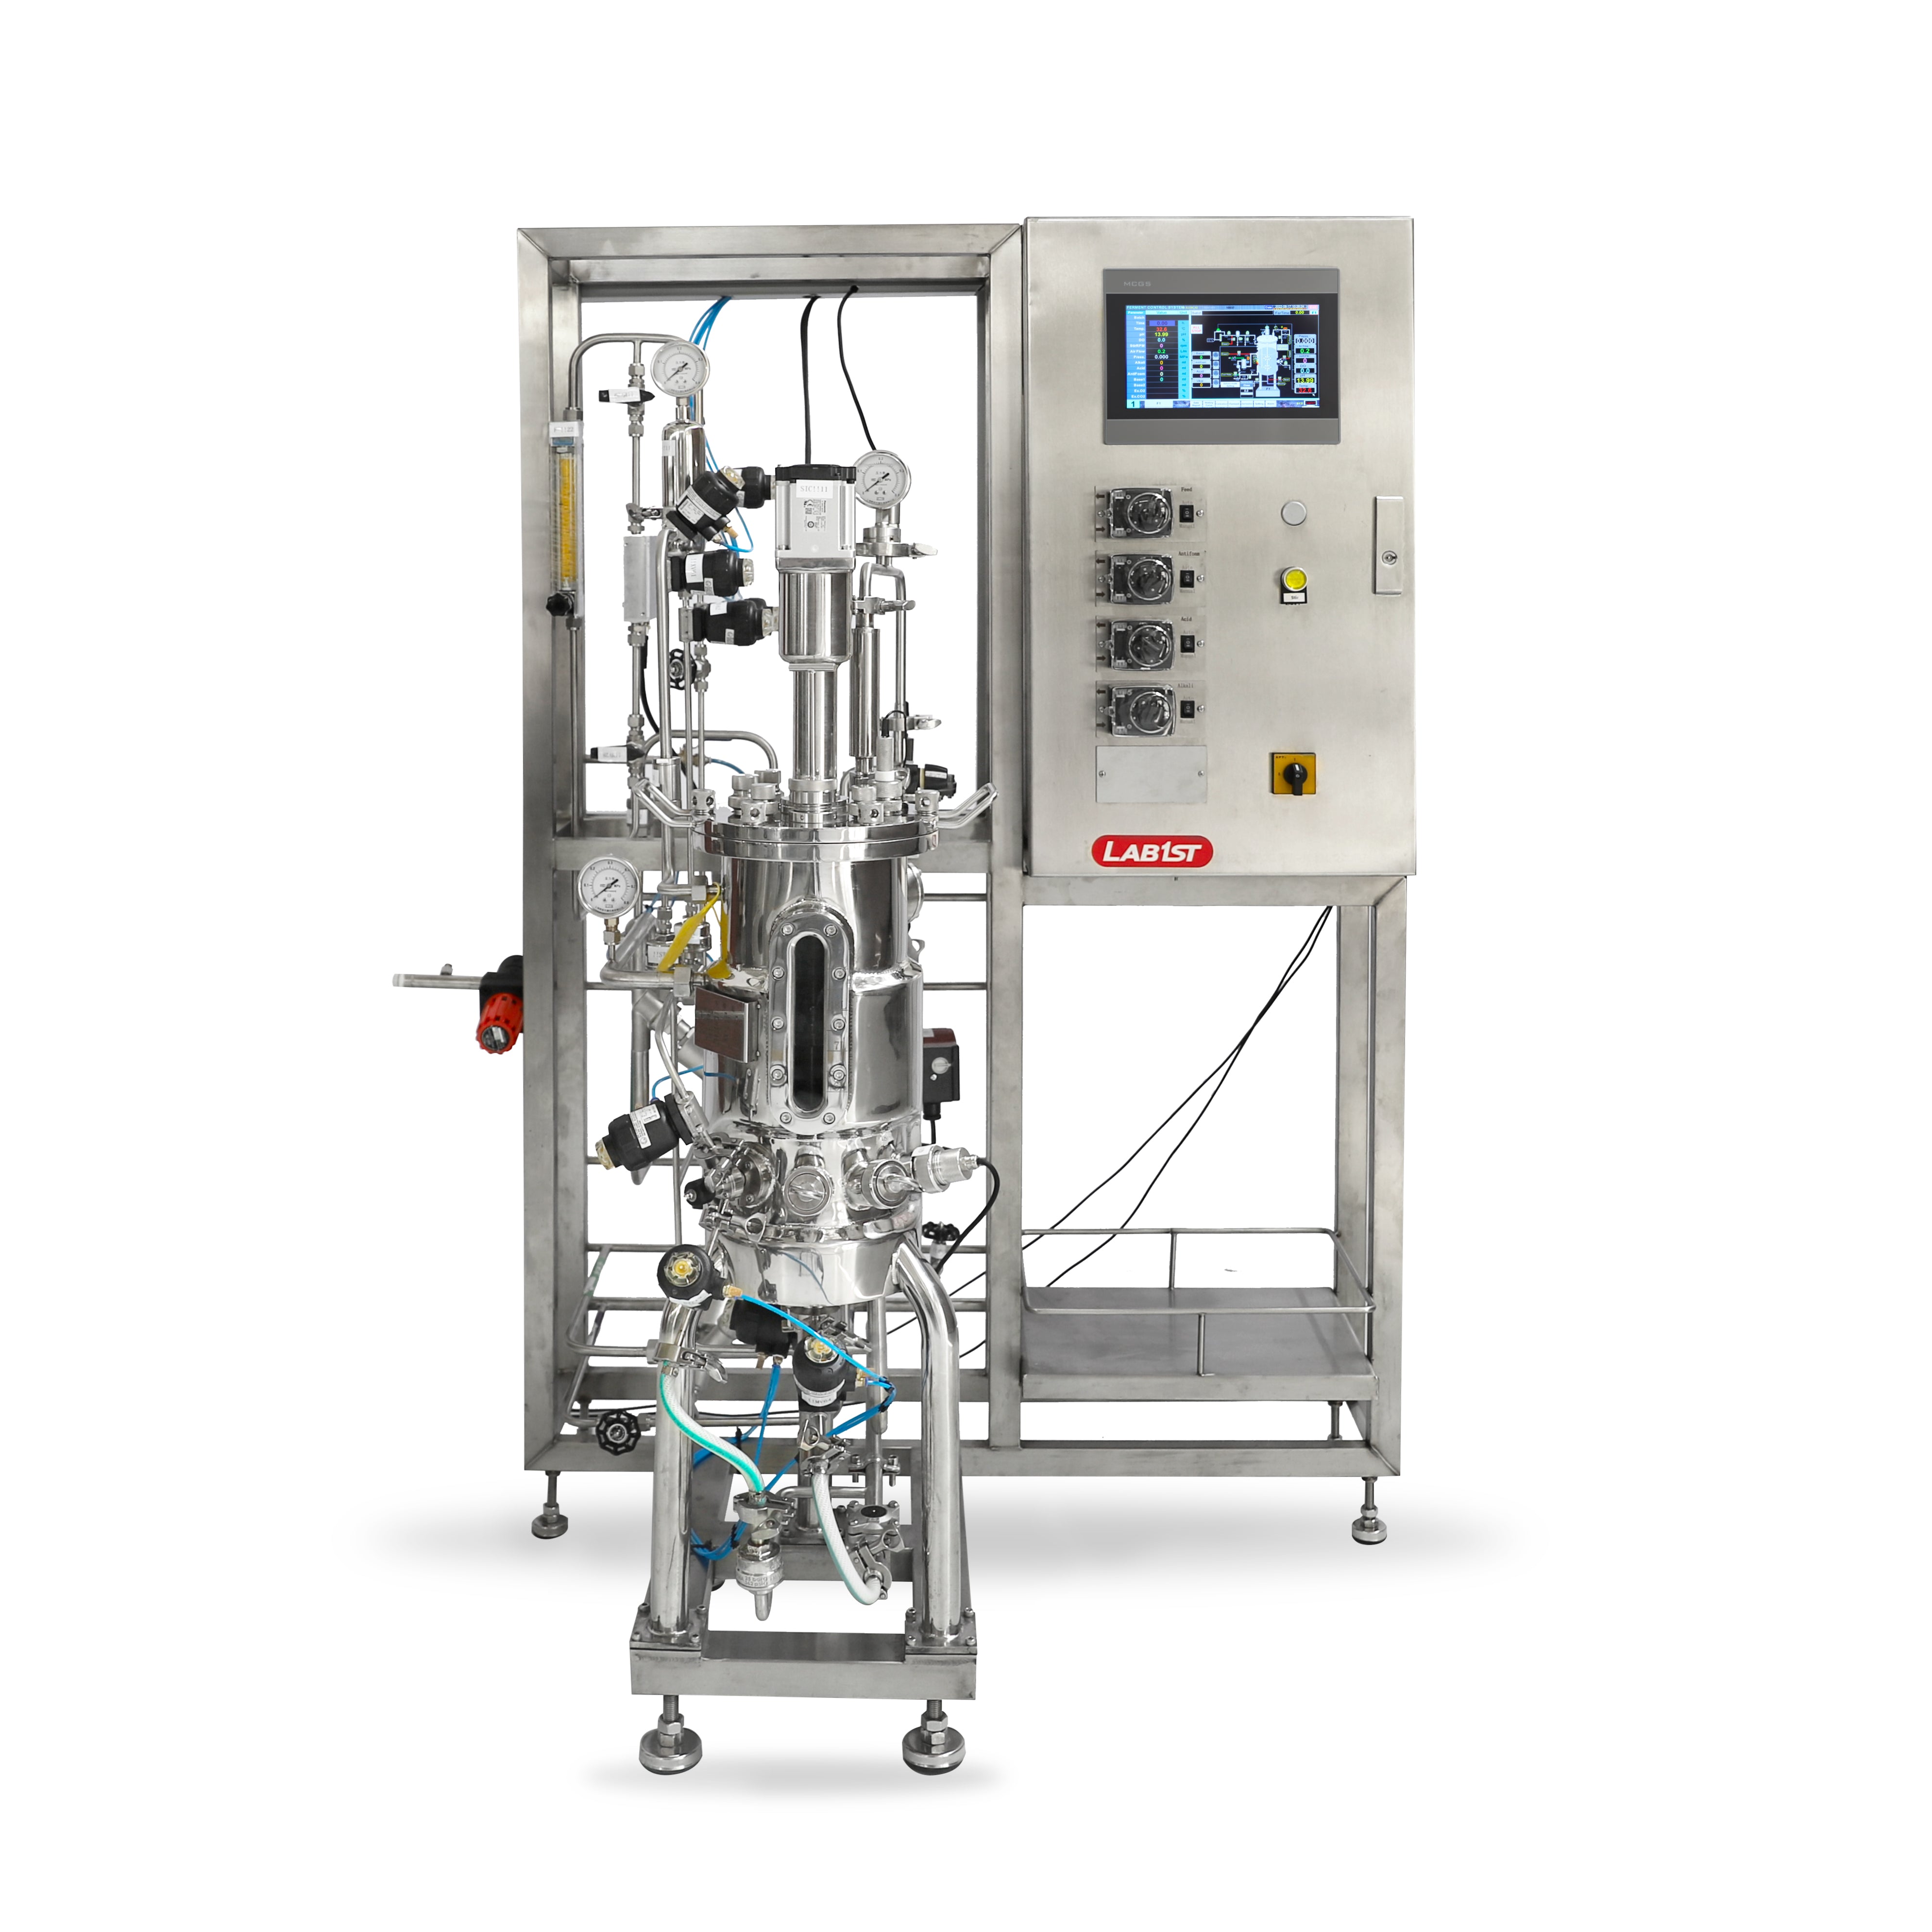 30L Stainless Steel Bioreactor for Microbial Fermentation with 2 Gas Inlets BR500-M1